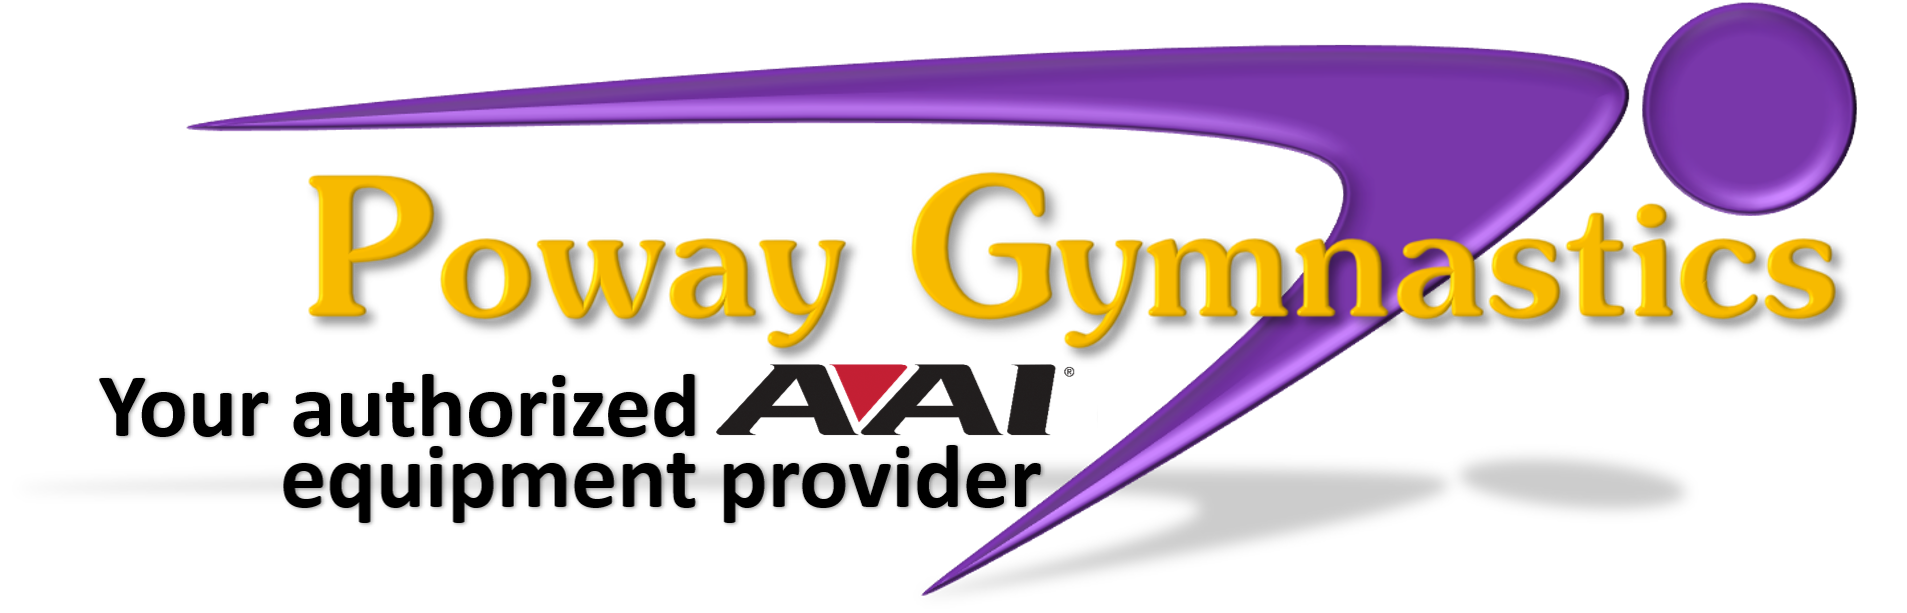 USA Gymnastics extends relationship with AAI as Official Equipment Supplier  for Artistic Gymnastics Development, Xcel programs • USA Gymnastics